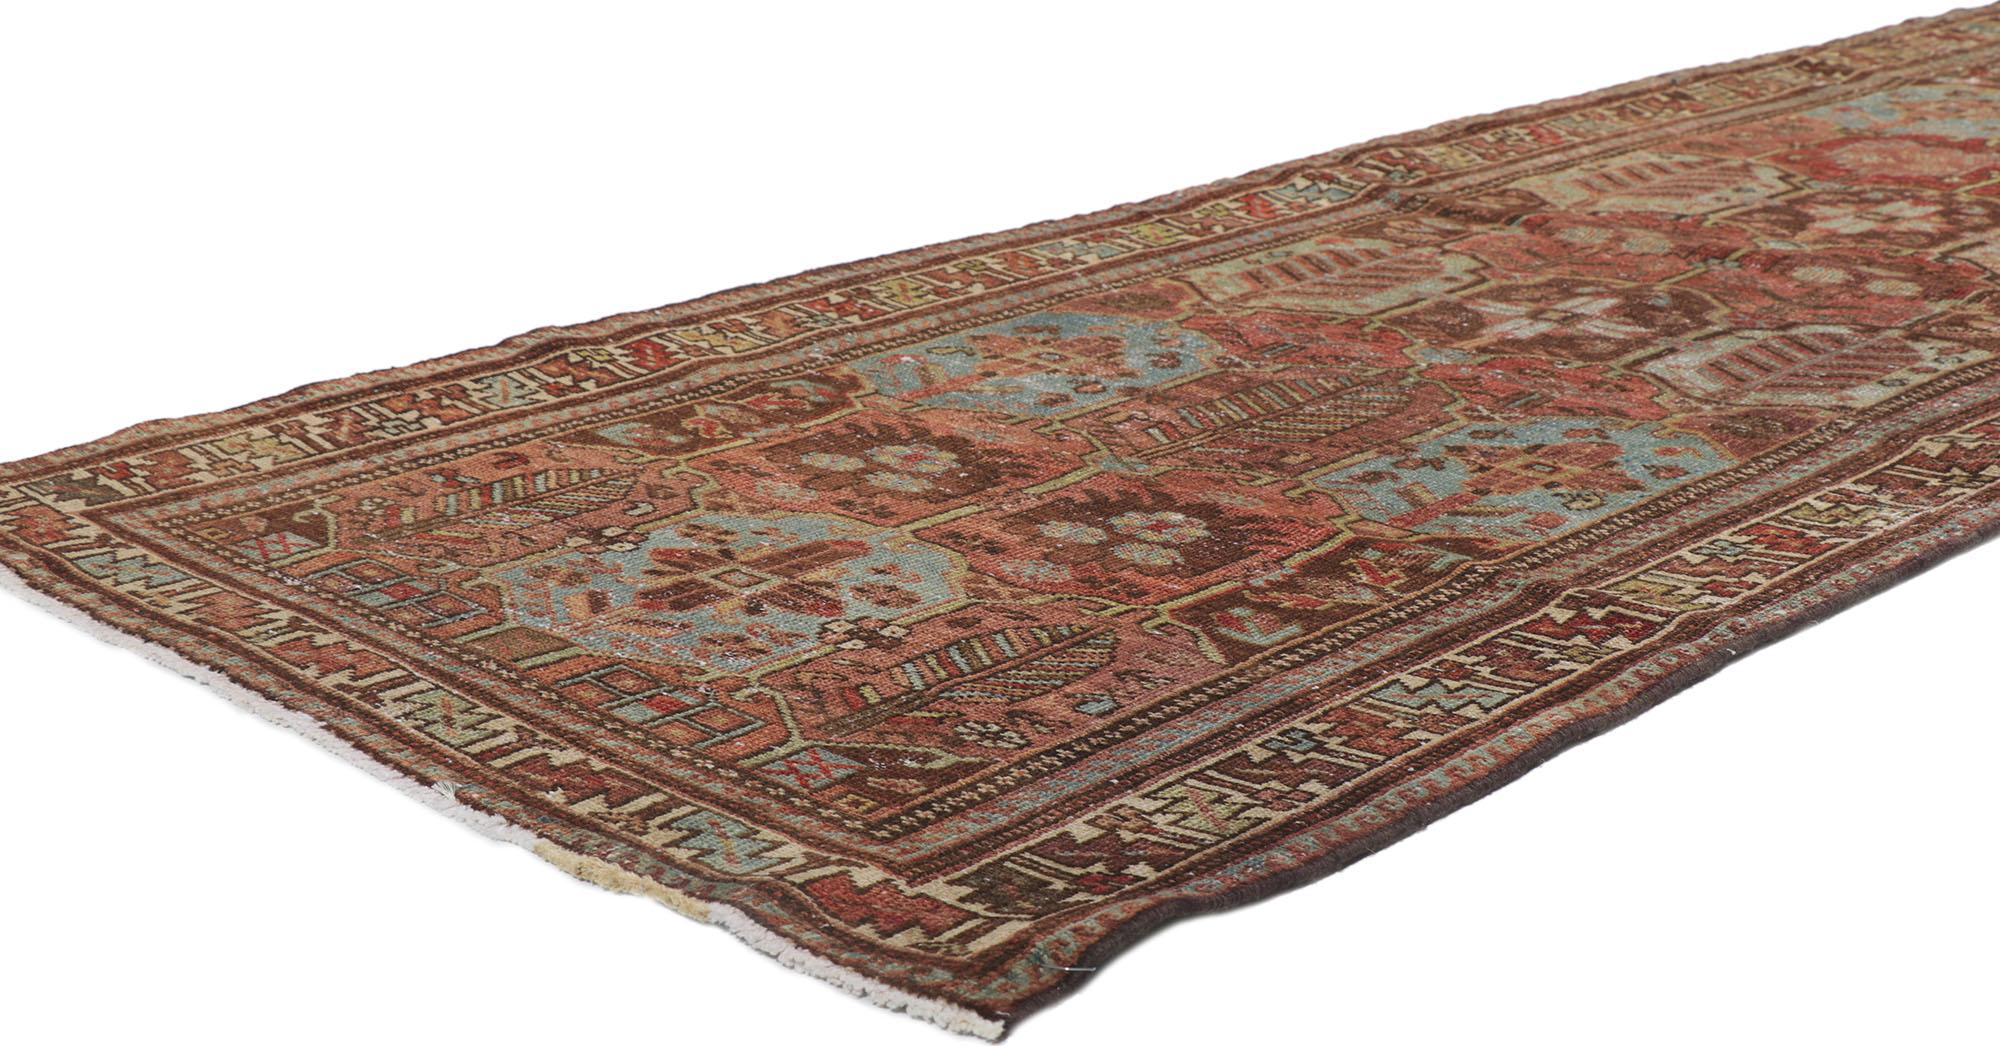 60974 Distressed Antique Persian Bakhtiari Runner 03'03 x 09'03. Balancing traditional design elements with rustic sensibility and nostalgic charm, this hand knotted wool distressed antique Persian Bakhtiari runner can beautifully blend modern,